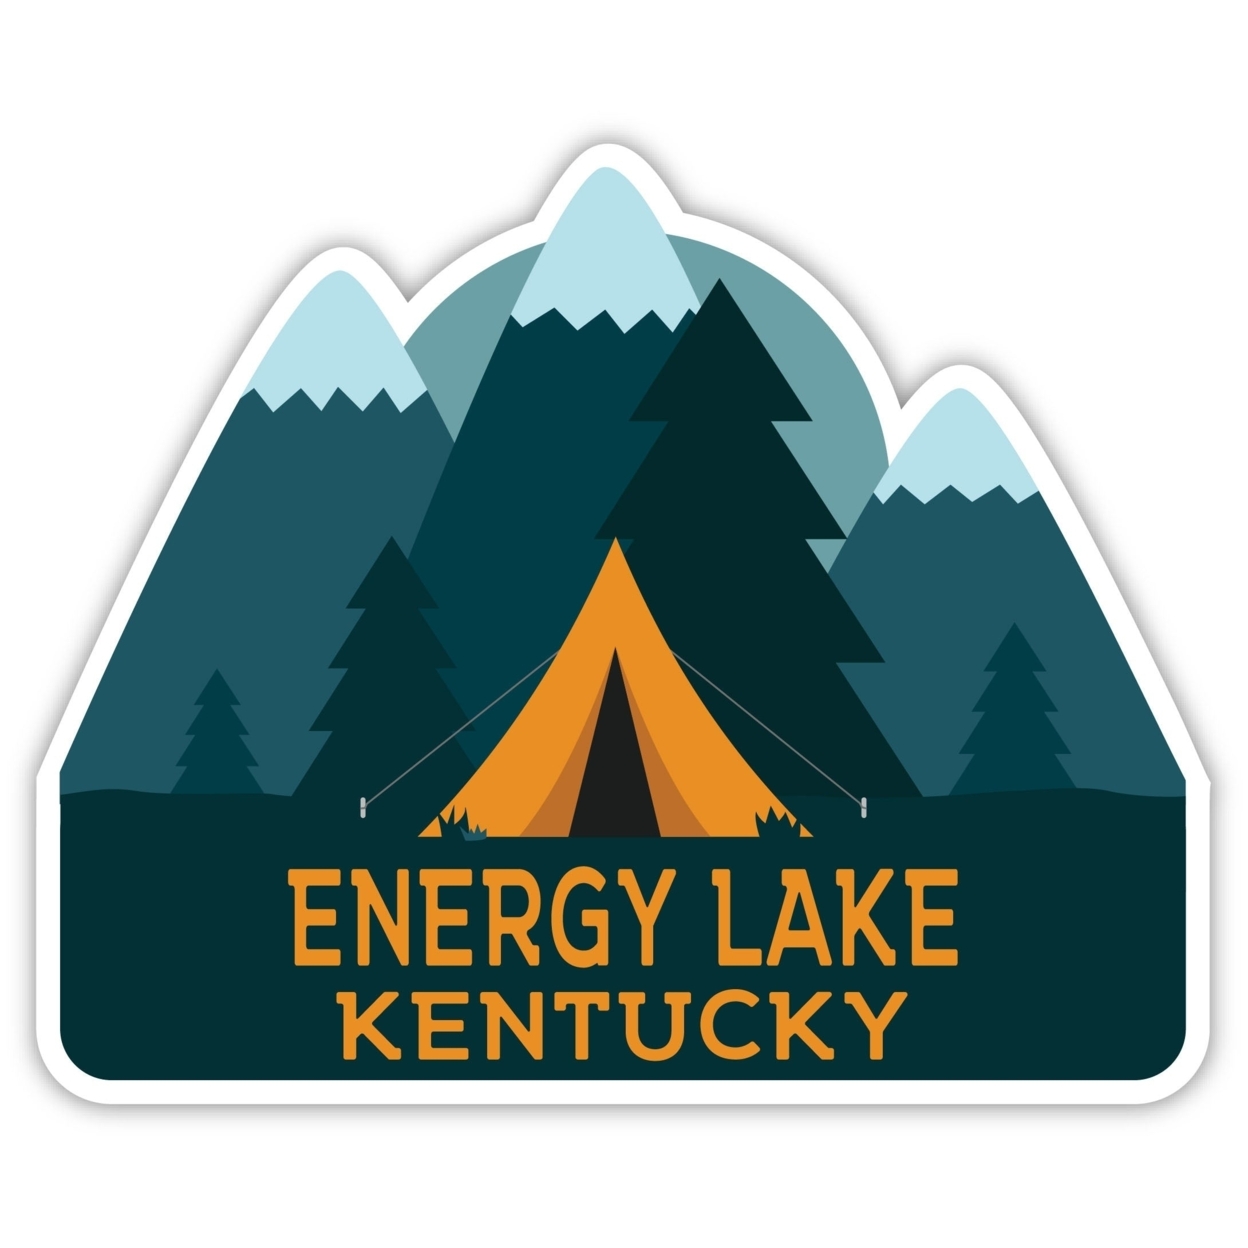 Energy Lake Kentucky Souvenir Decorative Stickers (Choose Theme And Size) - 4-Pack, 6-Inch, Tent